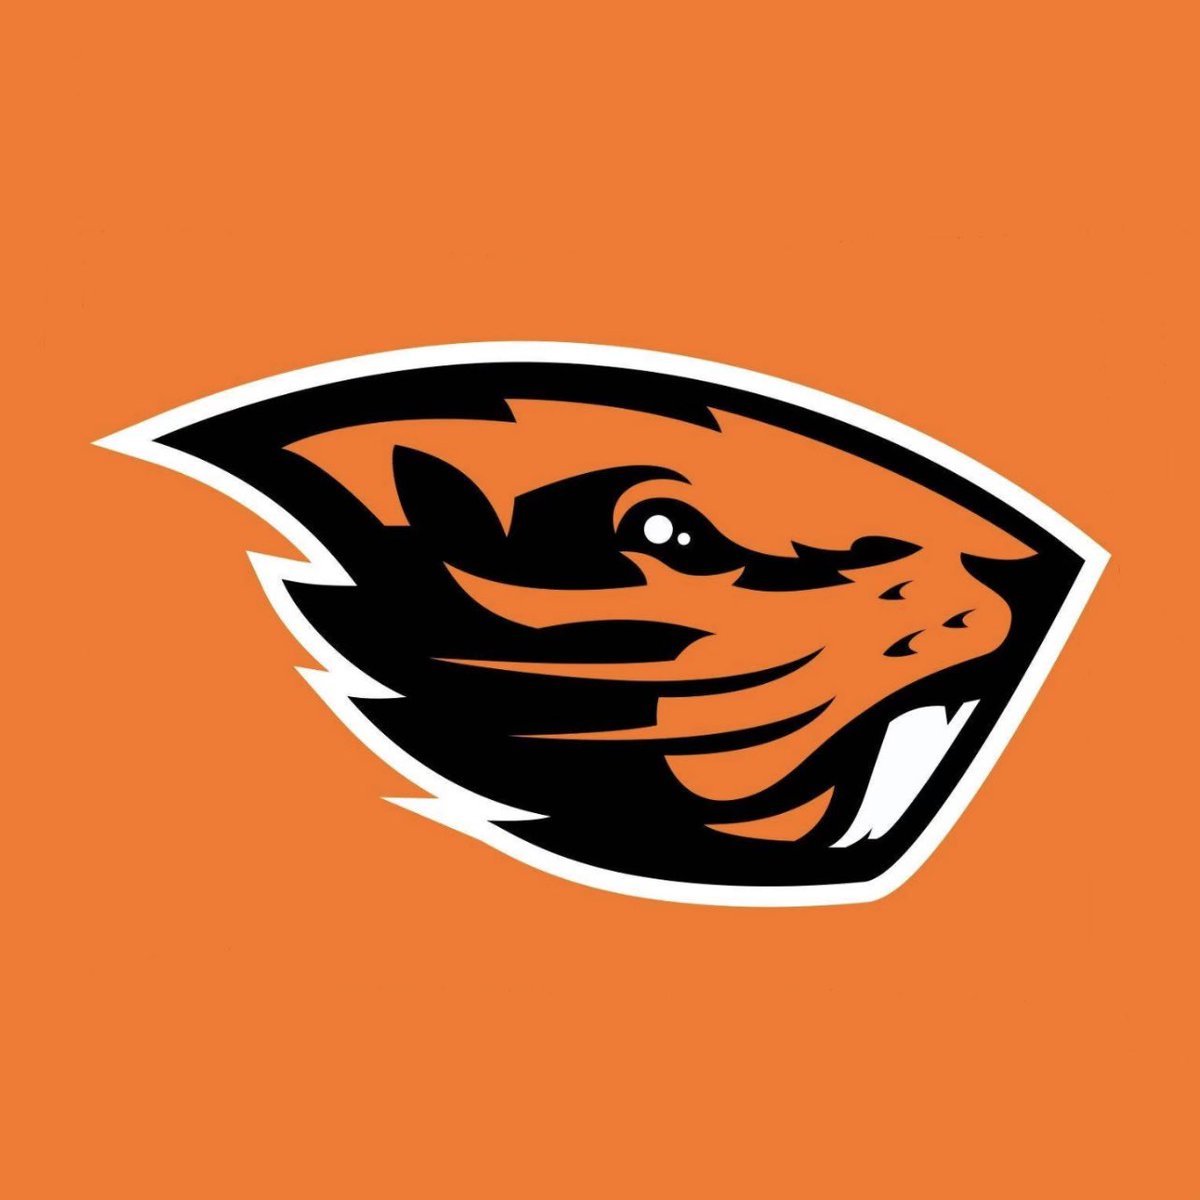 God is good! After a great conversation with Coach Gundy and Coach Hynson I am blessed to have received an offer from Oregon State University! #GoBeavs #AG2G @BeaverFootball @itsGundy @kefenseh @CoachAdhir @CoachDanny10 @BrandonHuffman